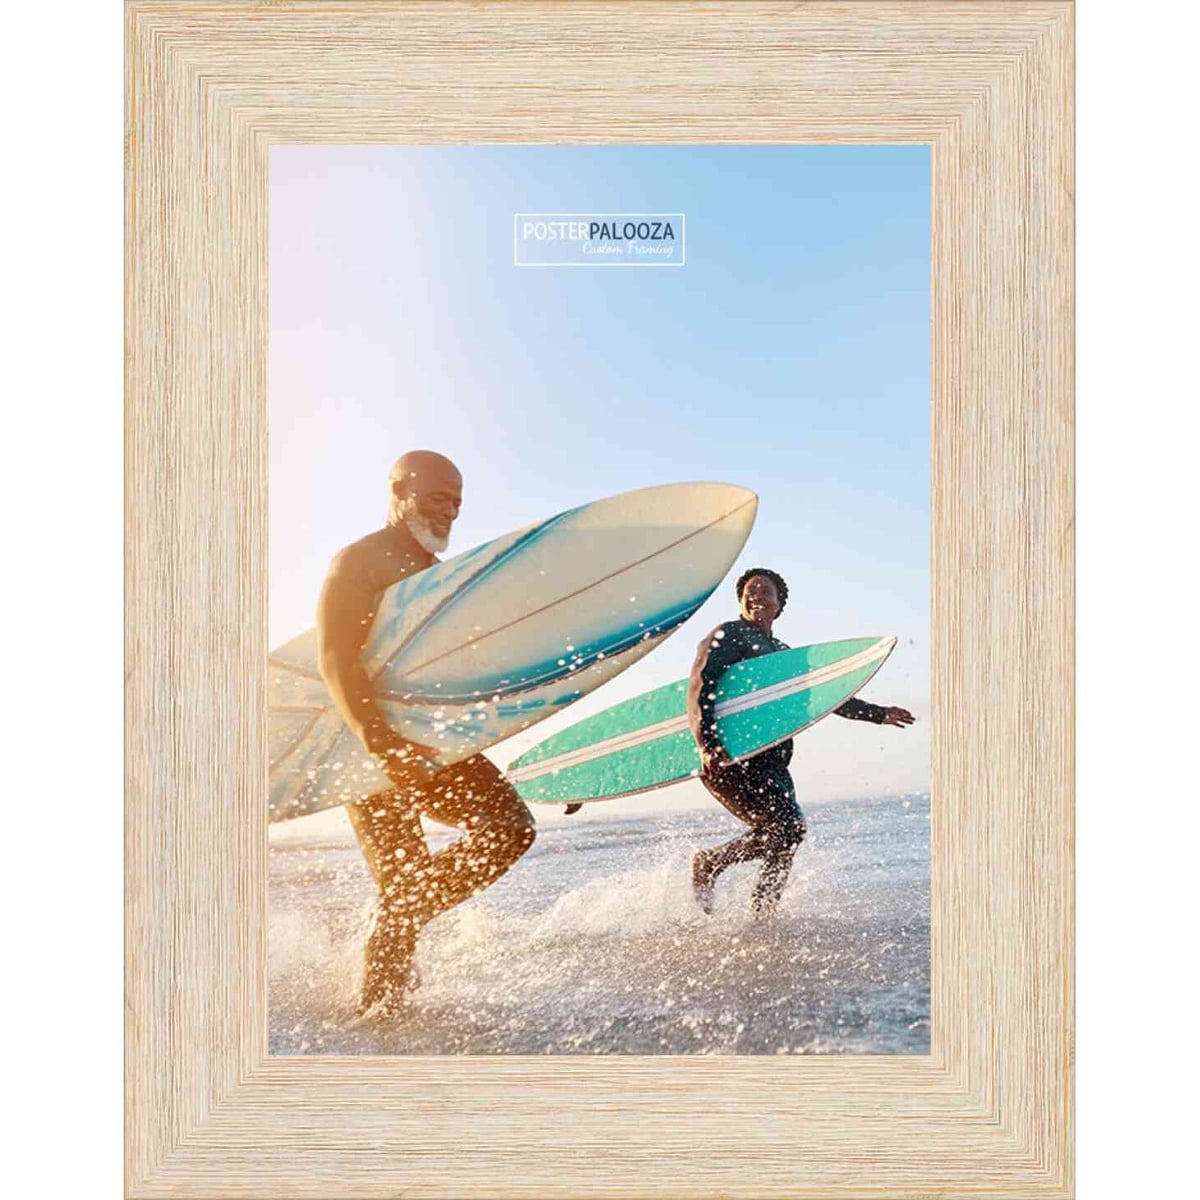 Poster Palooza 4x10 Frame White Solid Pine Wood Picture Frame | UV Acrylic,  Foam Board Backing & Hanging Hardware